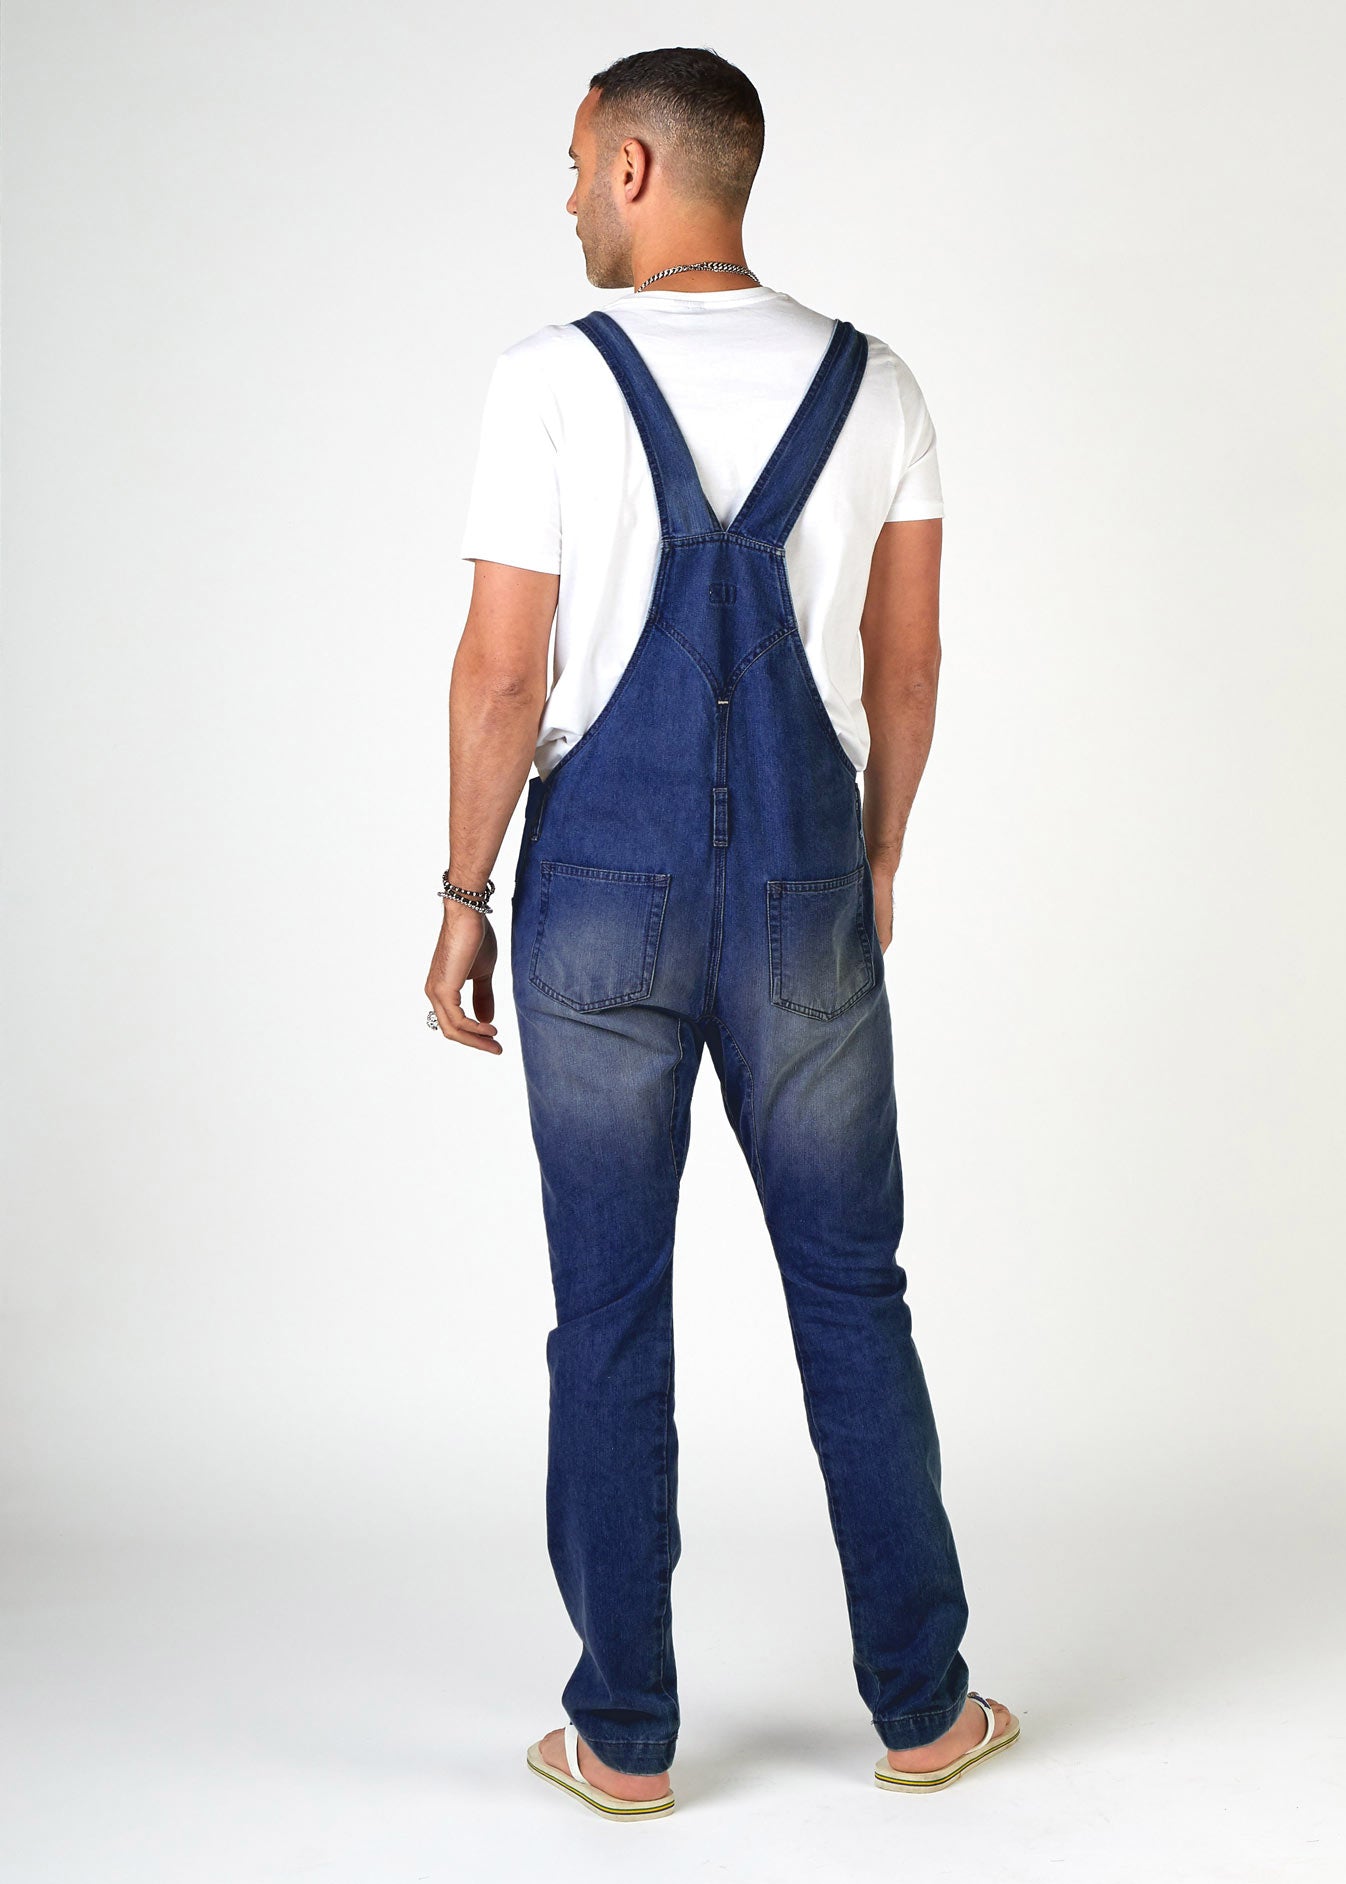 Full rear view of pure cotton bib overalls for men clearly showing back straps and pockets.